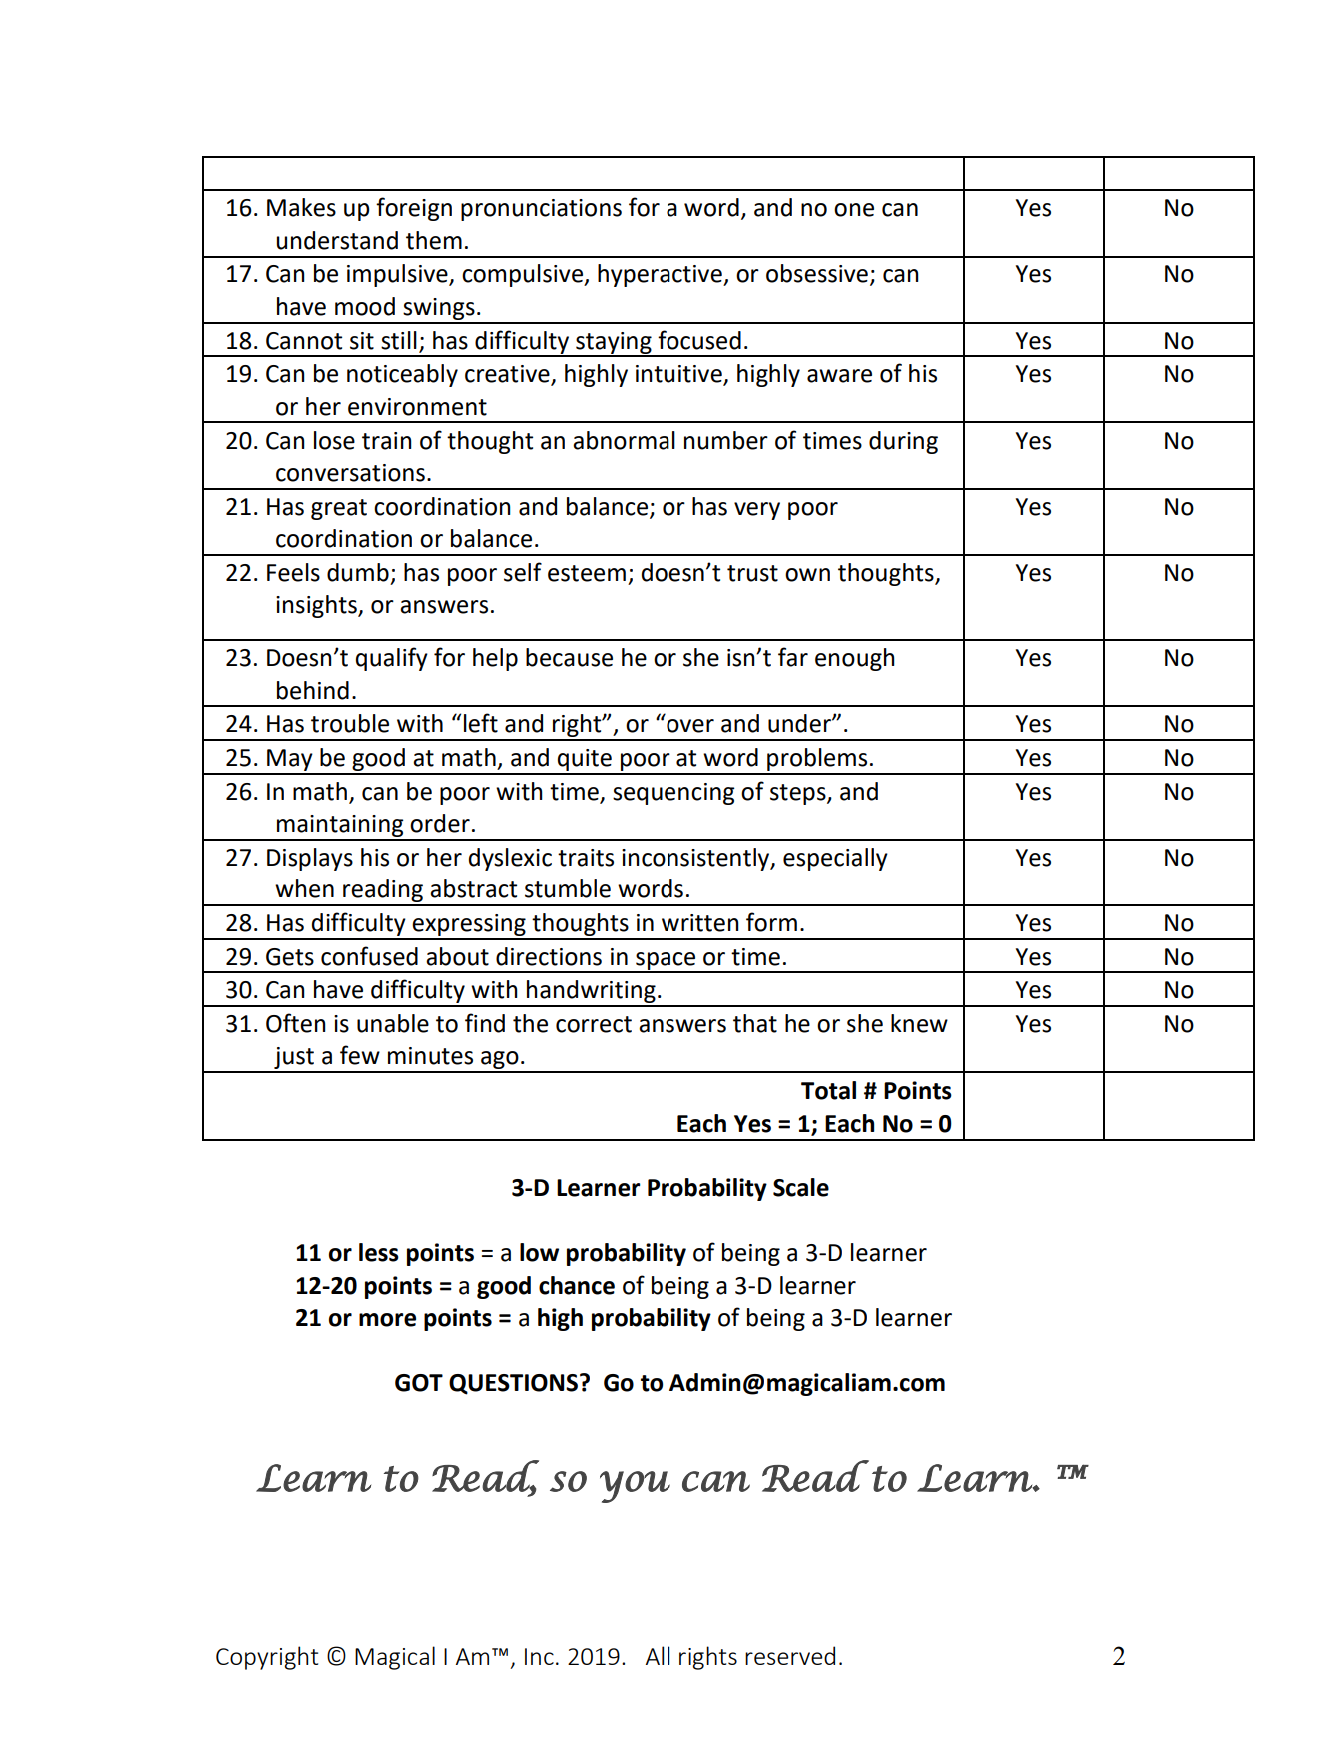 Dyslexic 3-D Learner Assessment page 2